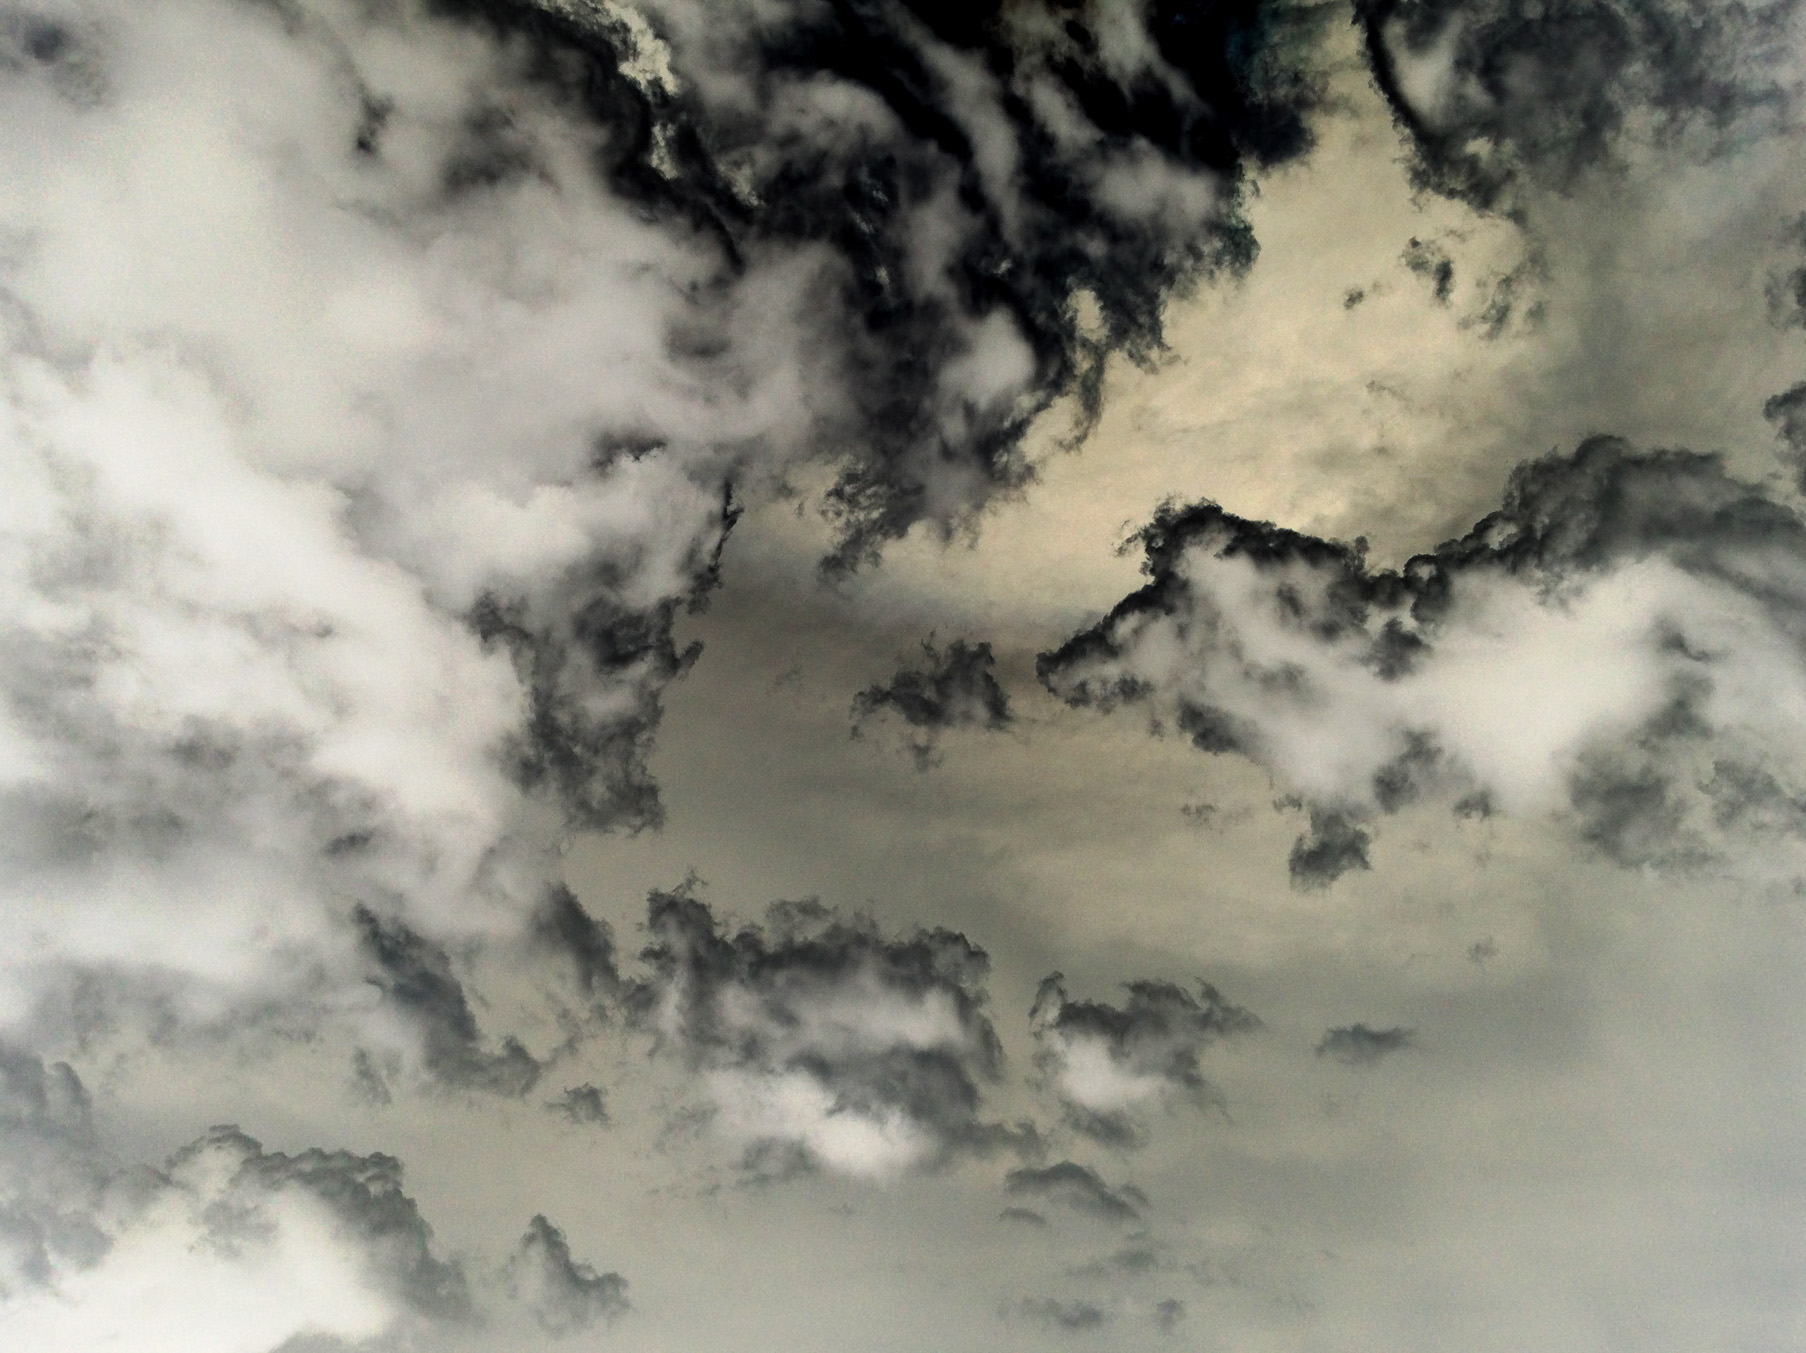 Inverted color photograph of a cloudy sky